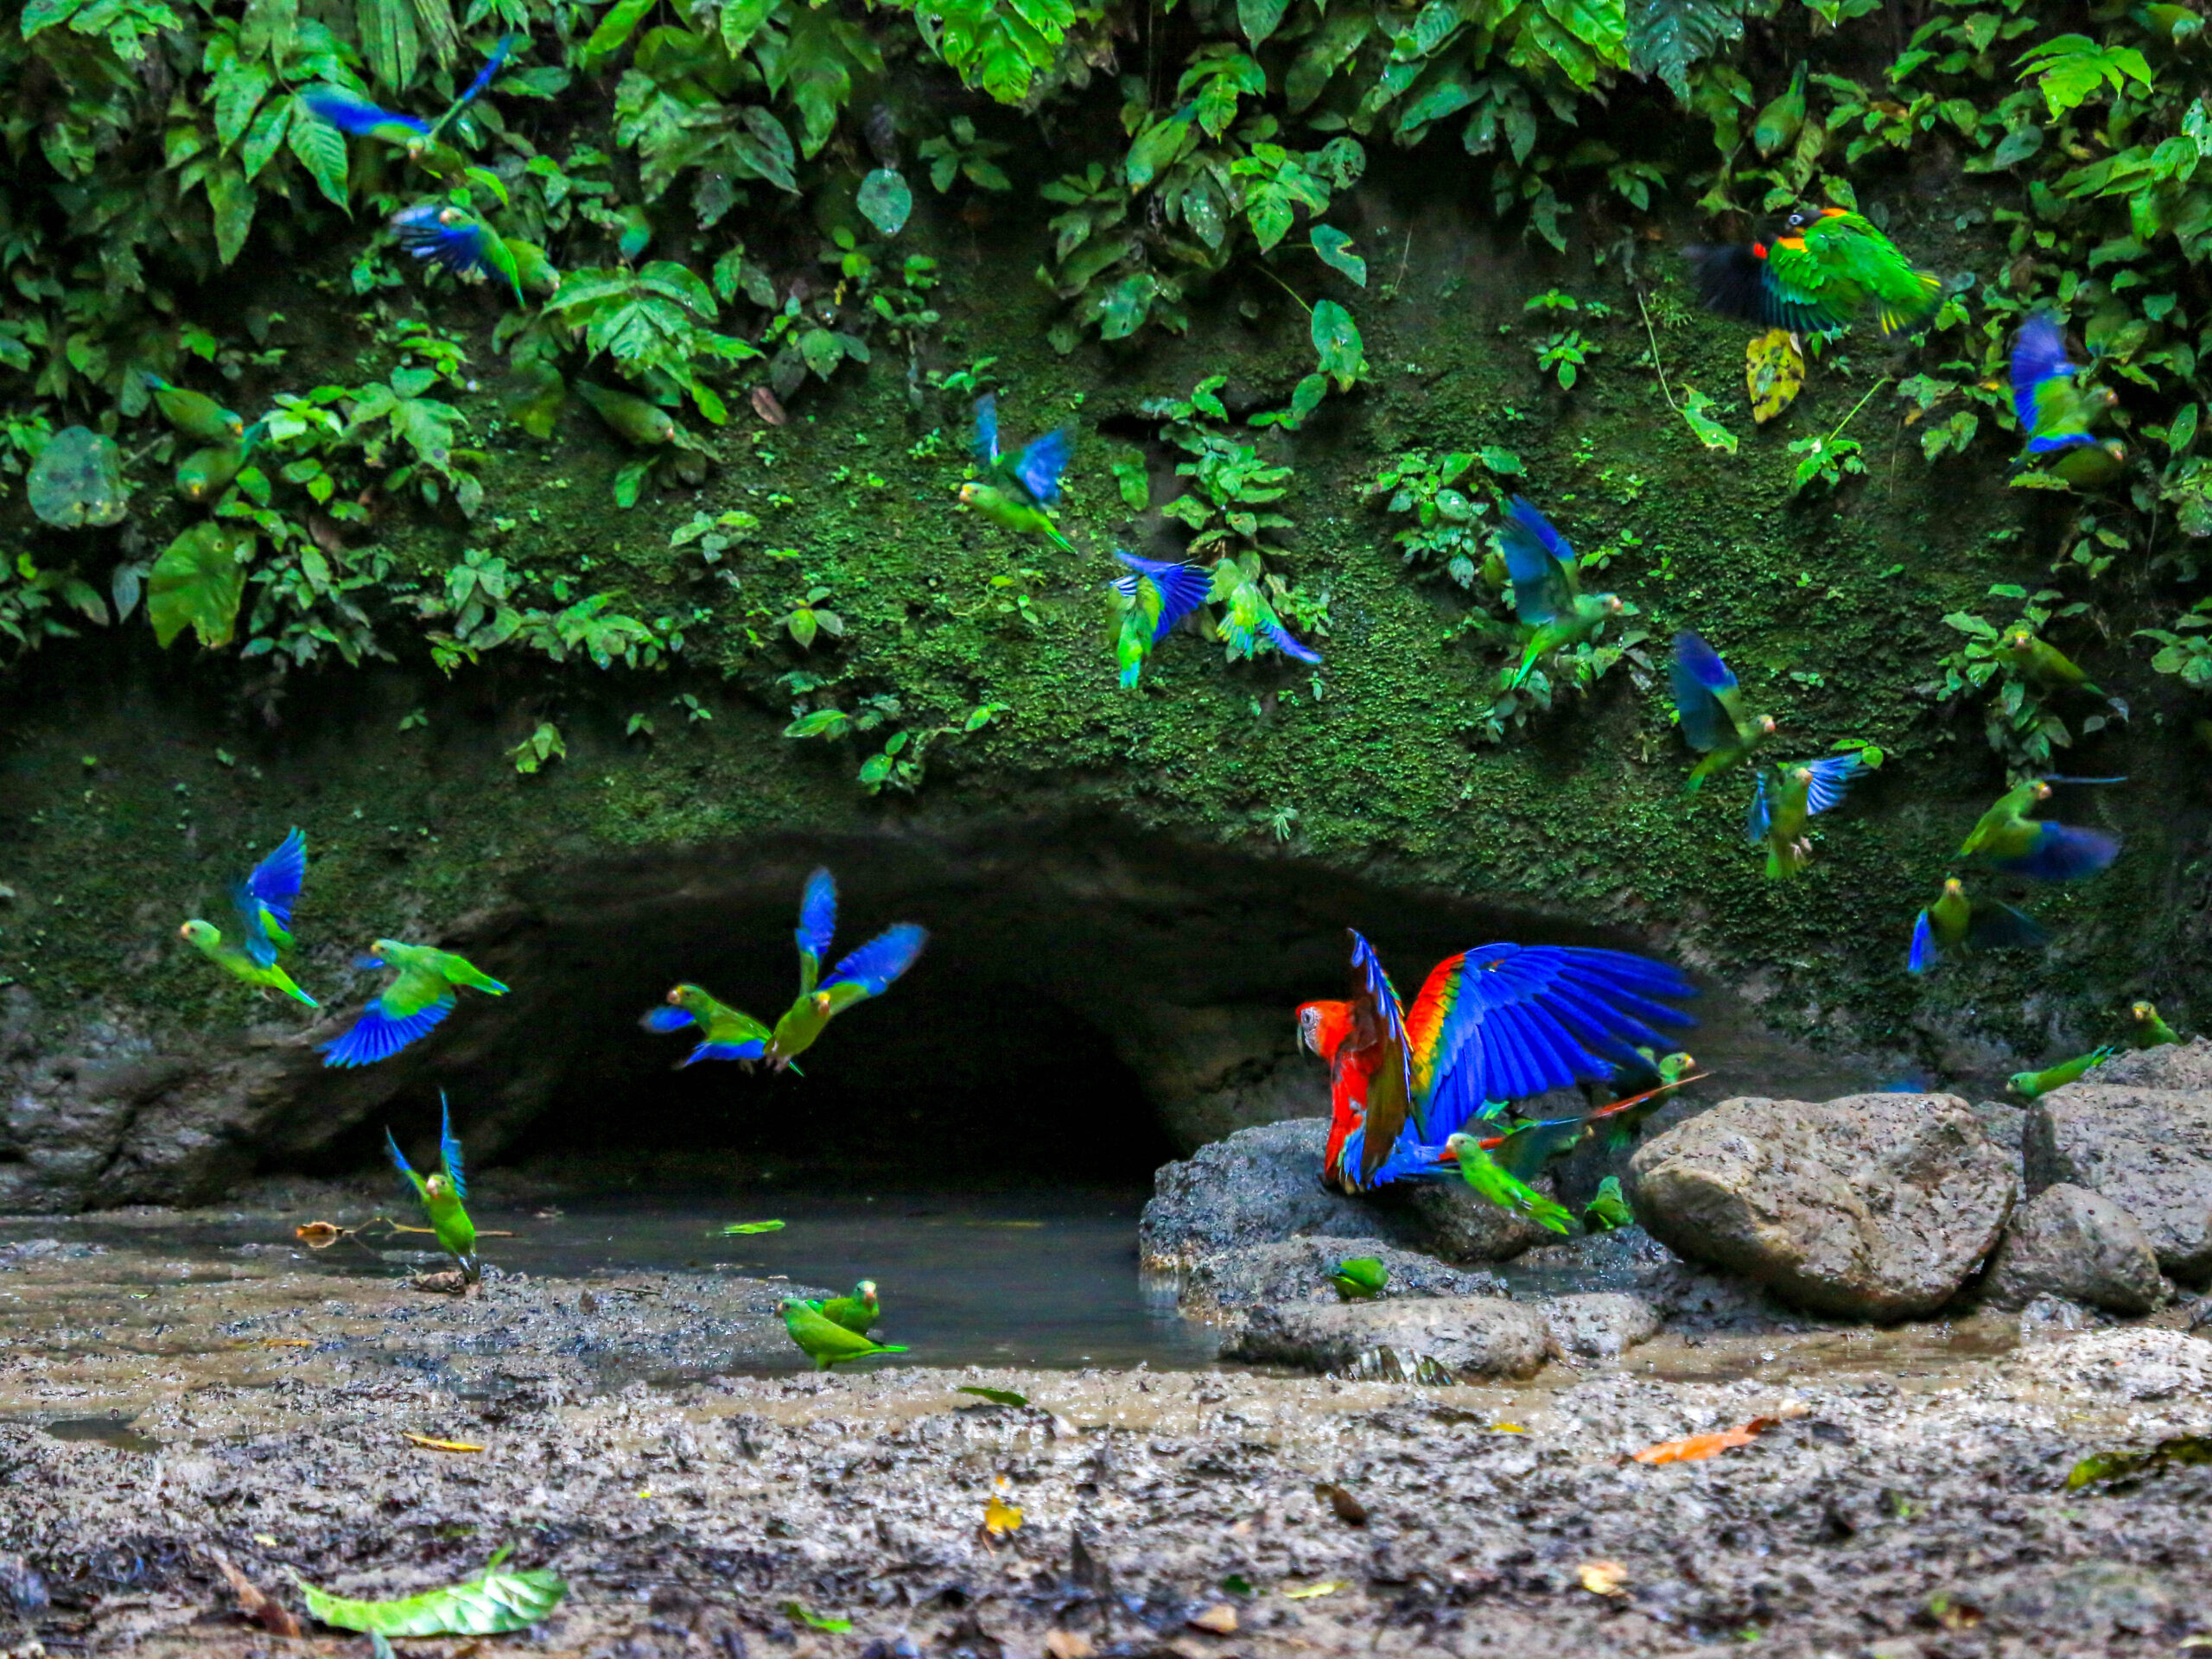 Macaw clay lick in Yasuni National Park